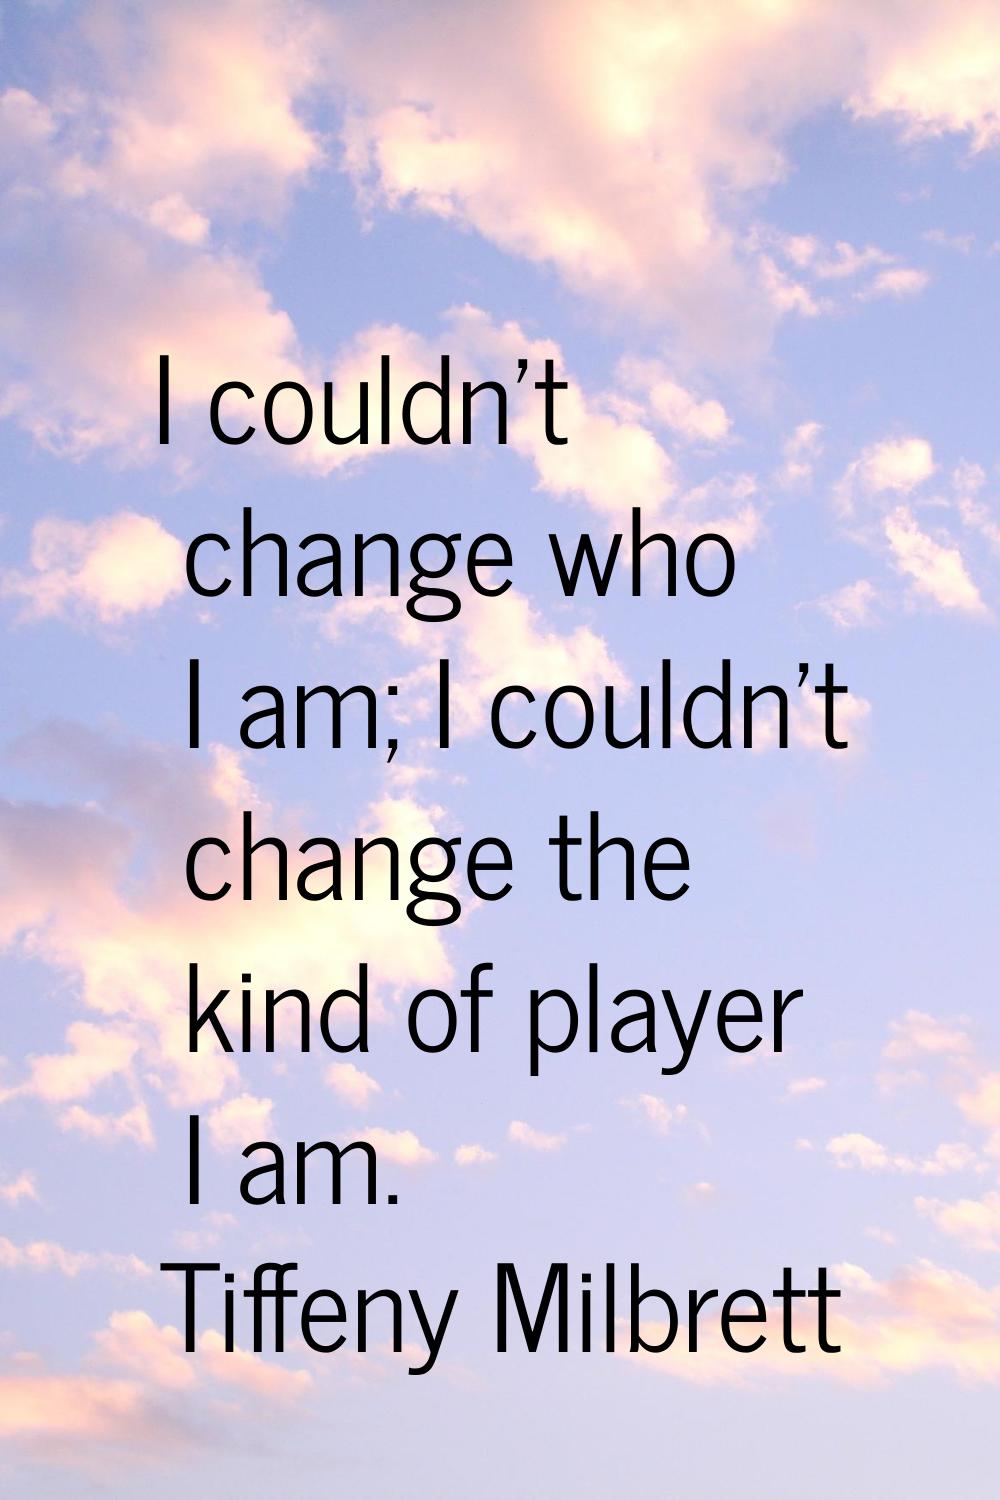 I couldn't change who I am; I couldn't change the kind of player I am.